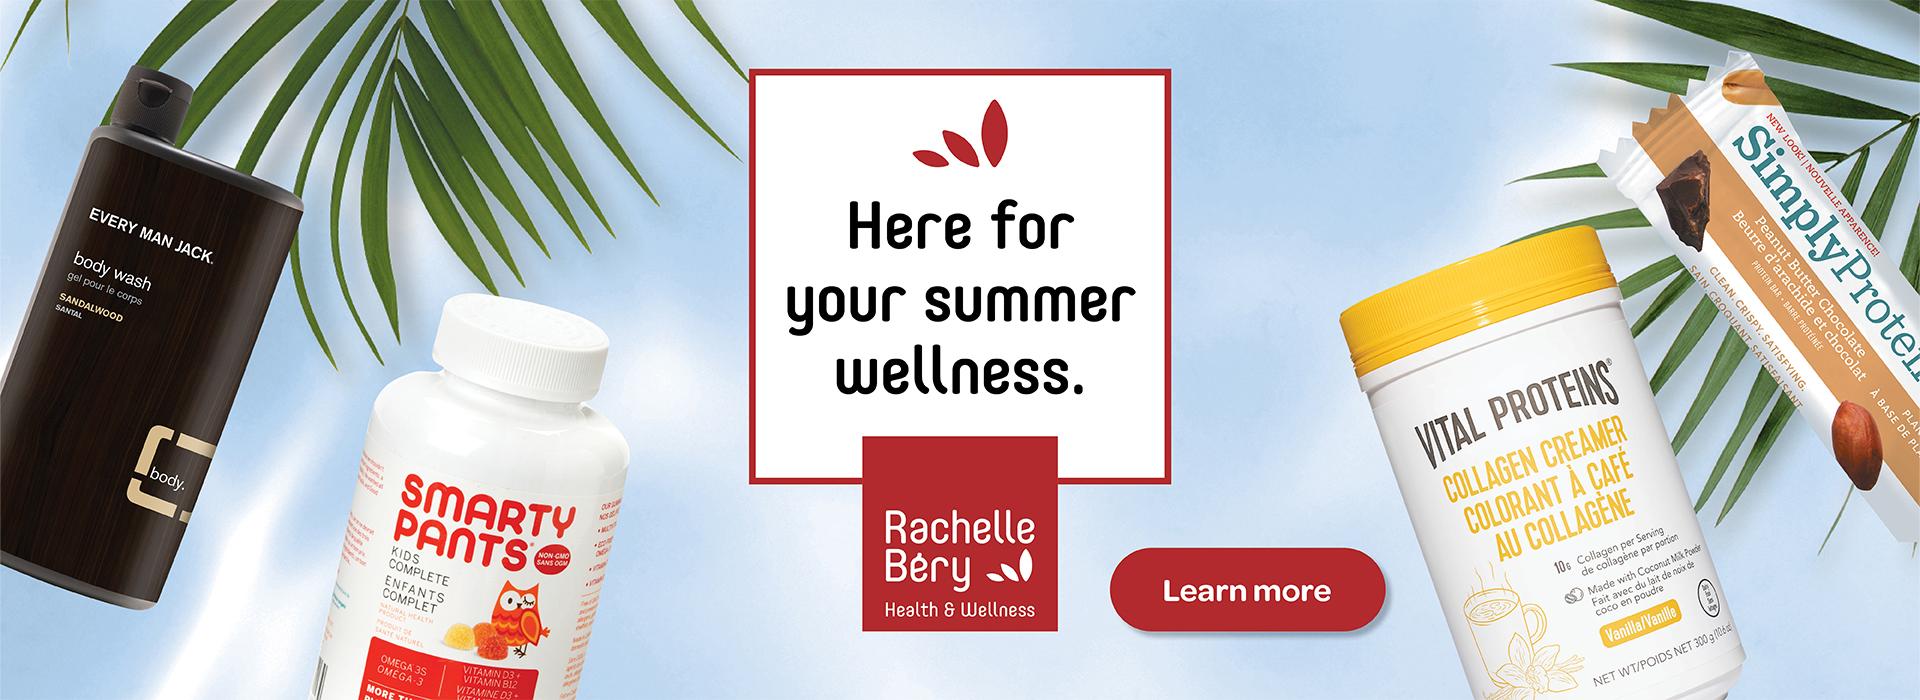 Text Reading 'We are here for your summer wellness. 'Learn more' from the button given below.'